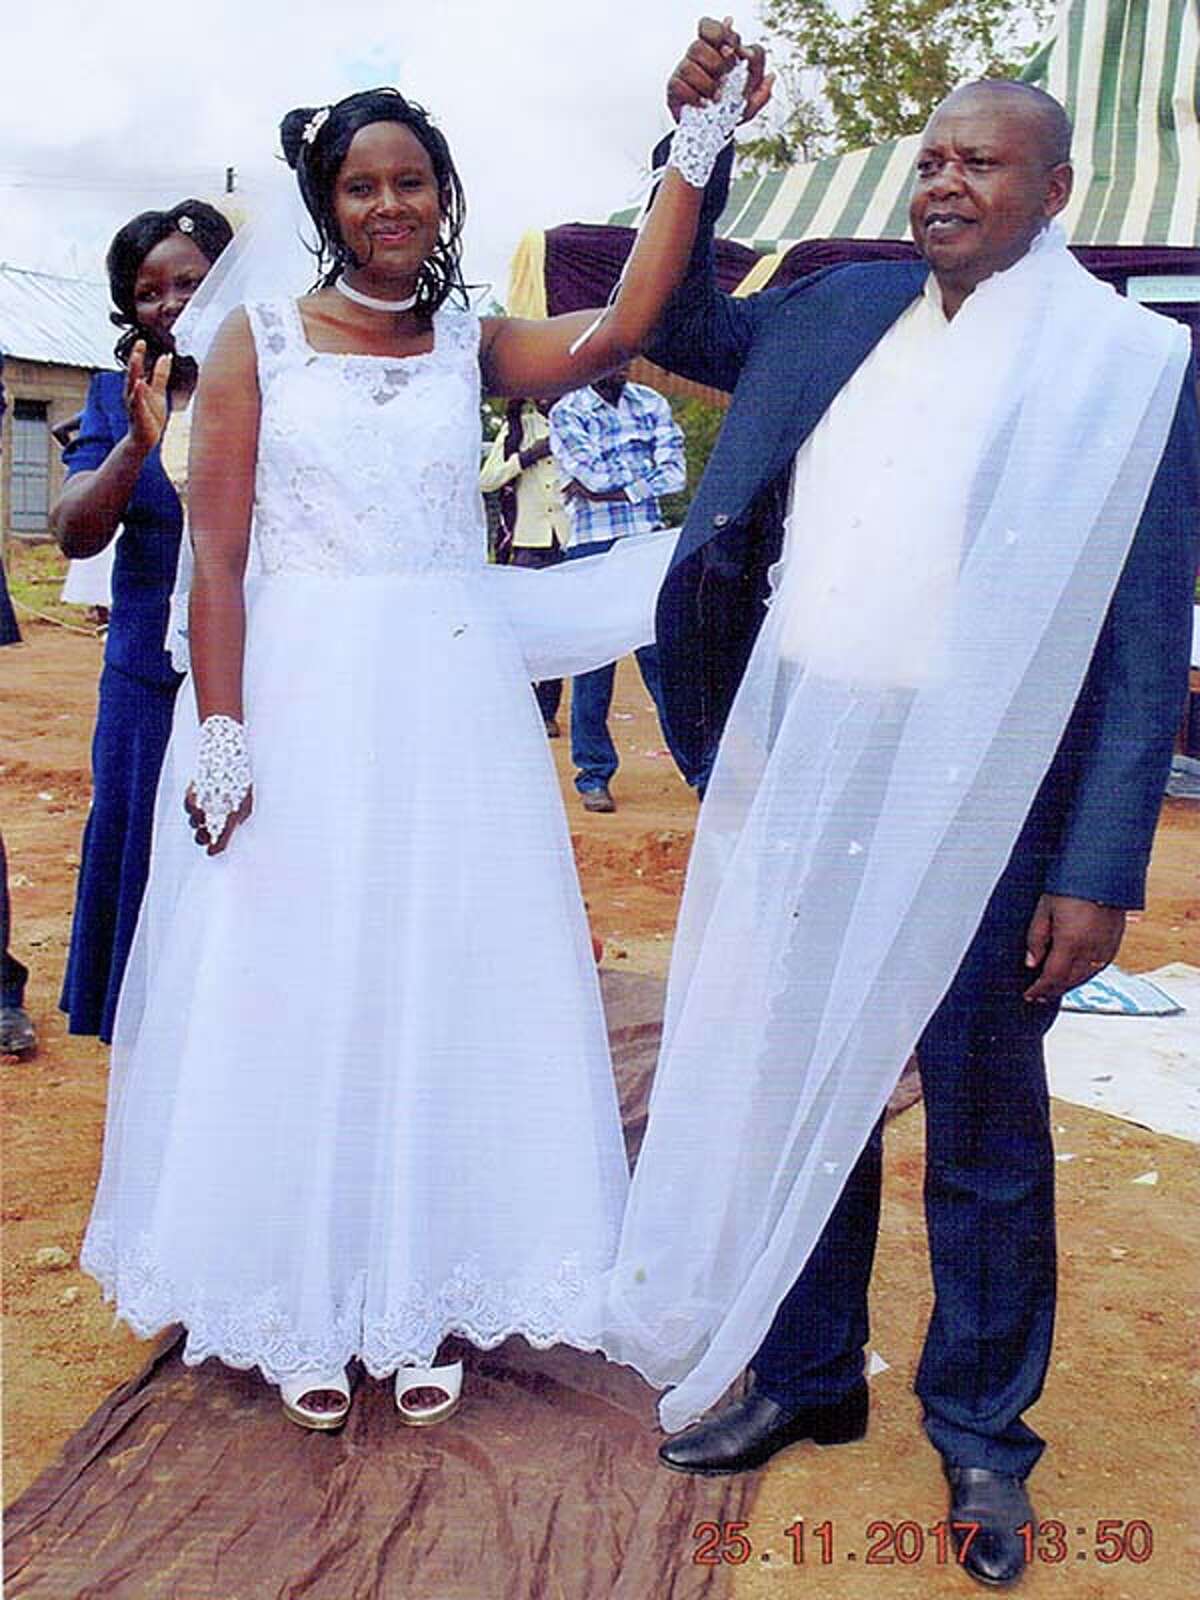 Pastor Samson Mulinge Mutuse celebrates his wedding to Evelyn Mueni Mulinge at Deliverance Church in Nthange, Kenya, on Nov. 25. Each lost a first spouse to AIDS.